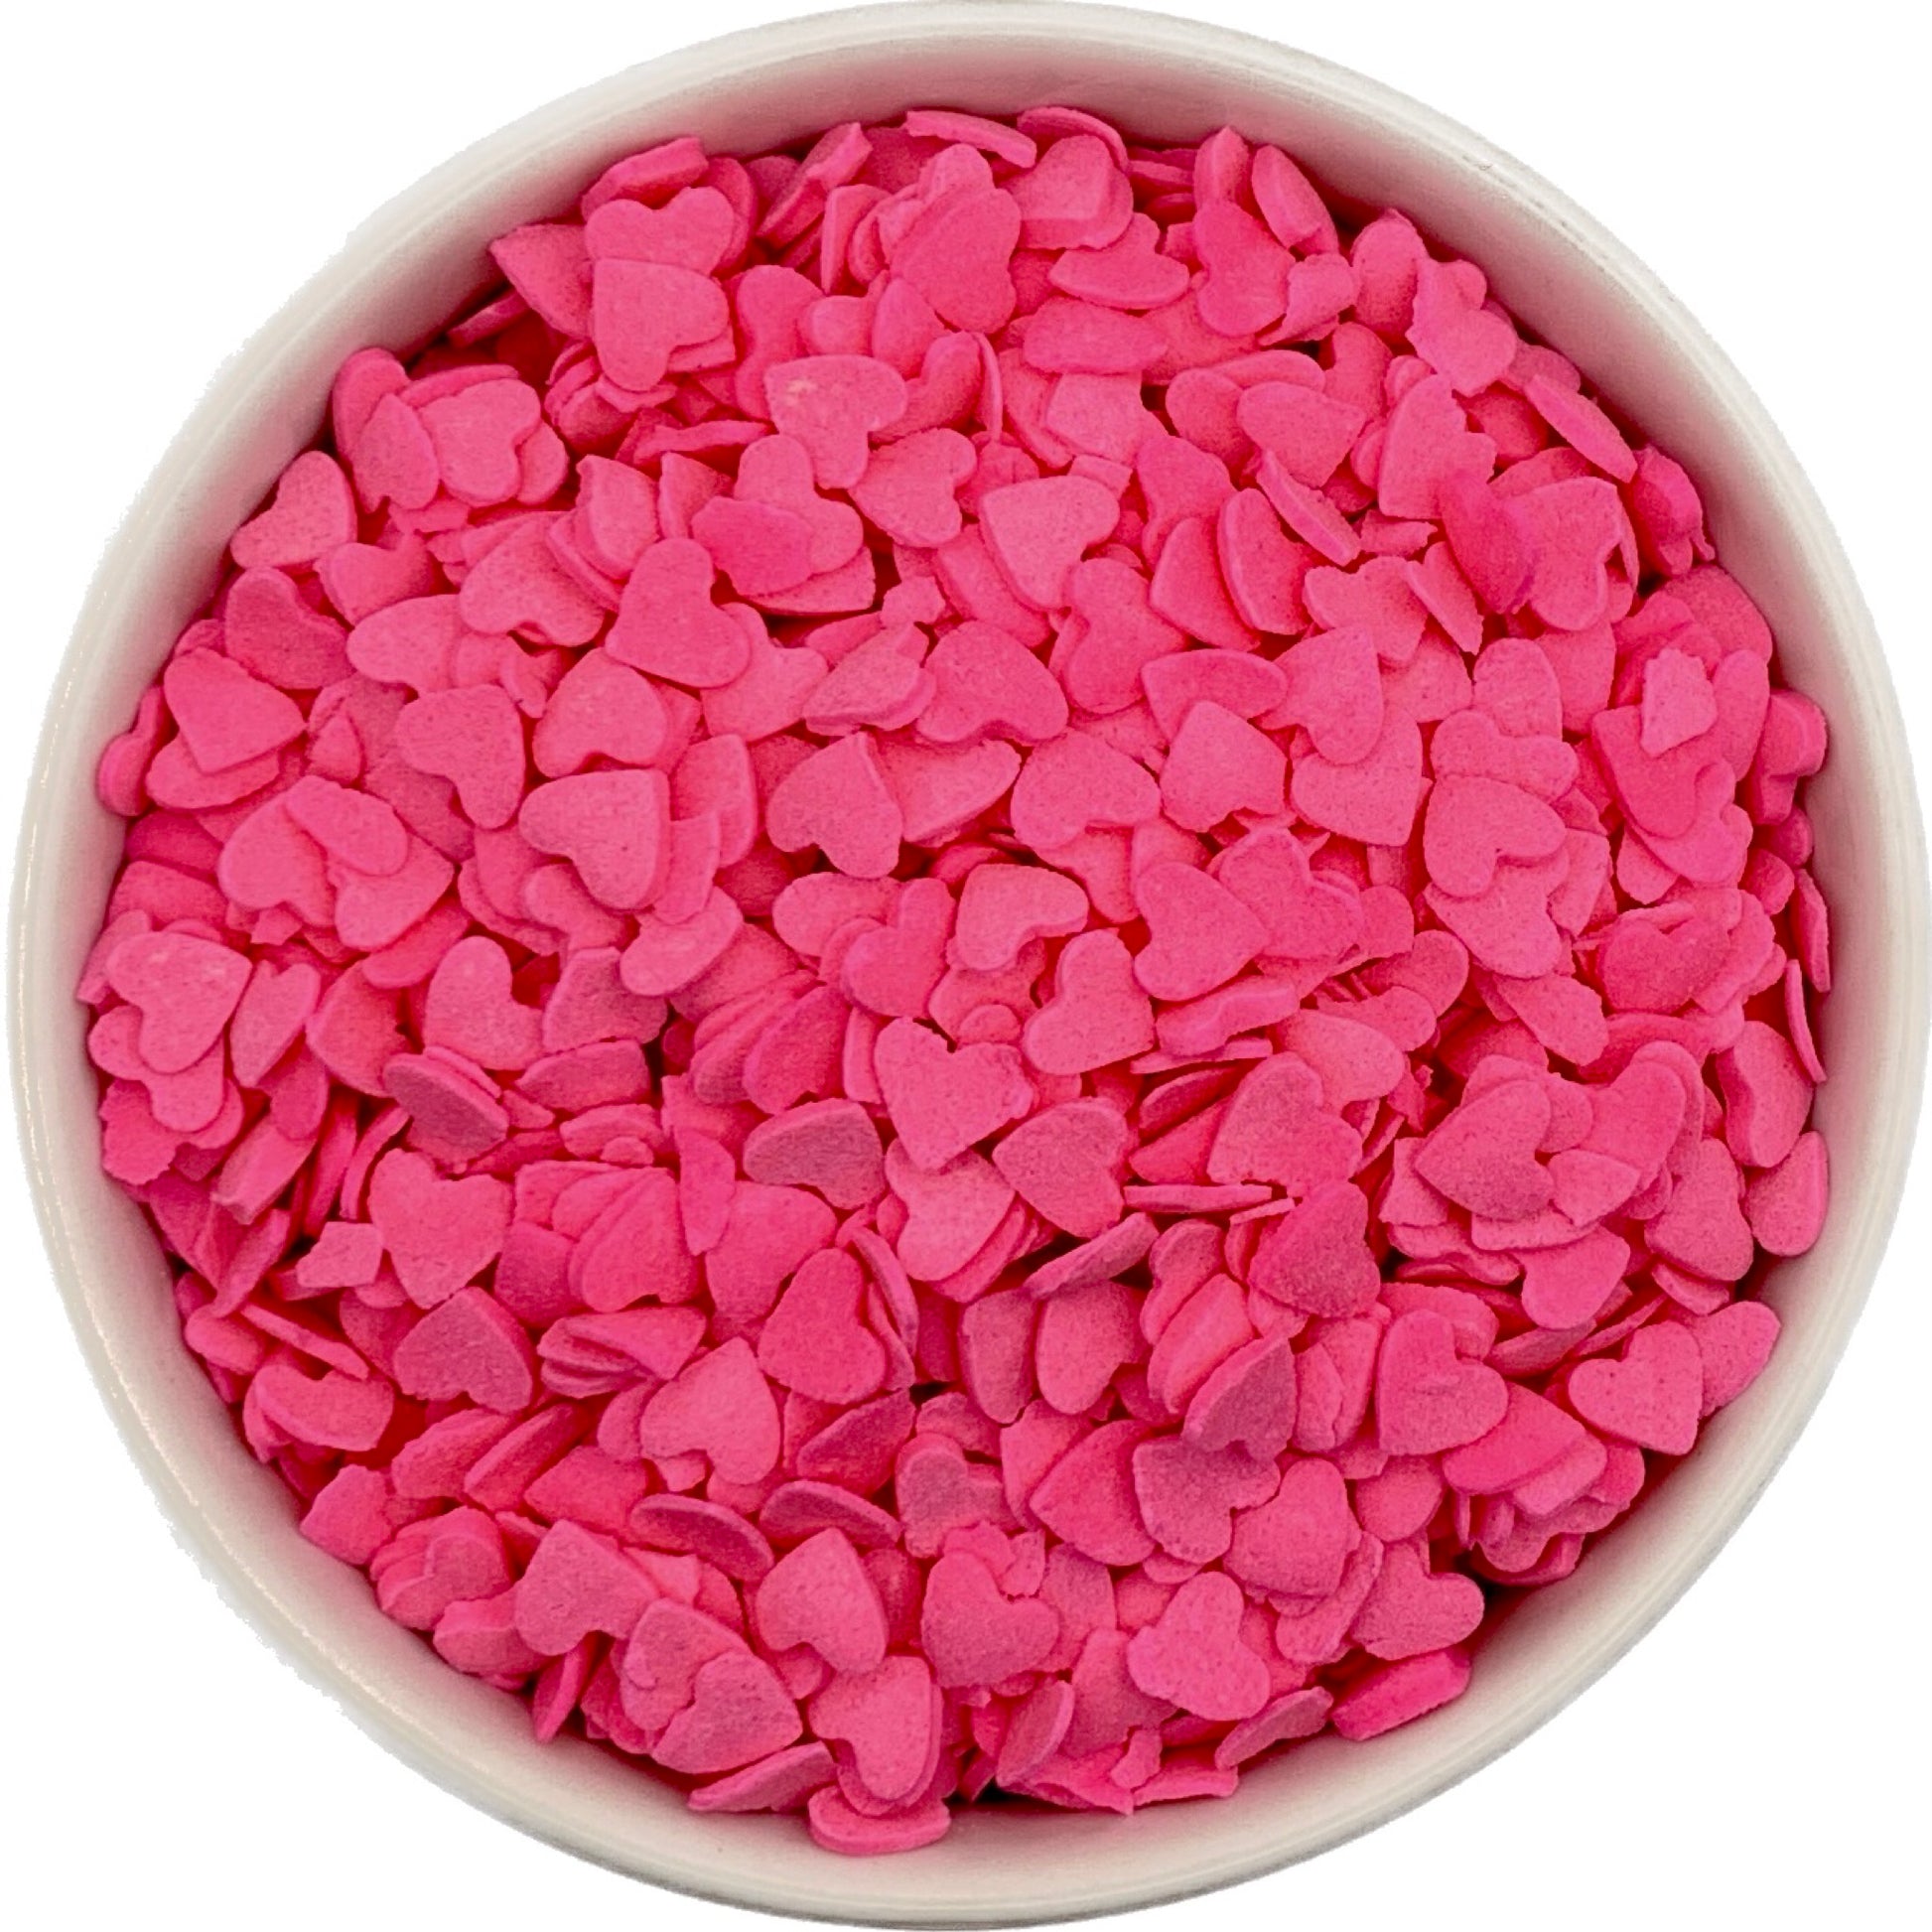 Pink Heart Sprinkles in a Bowl